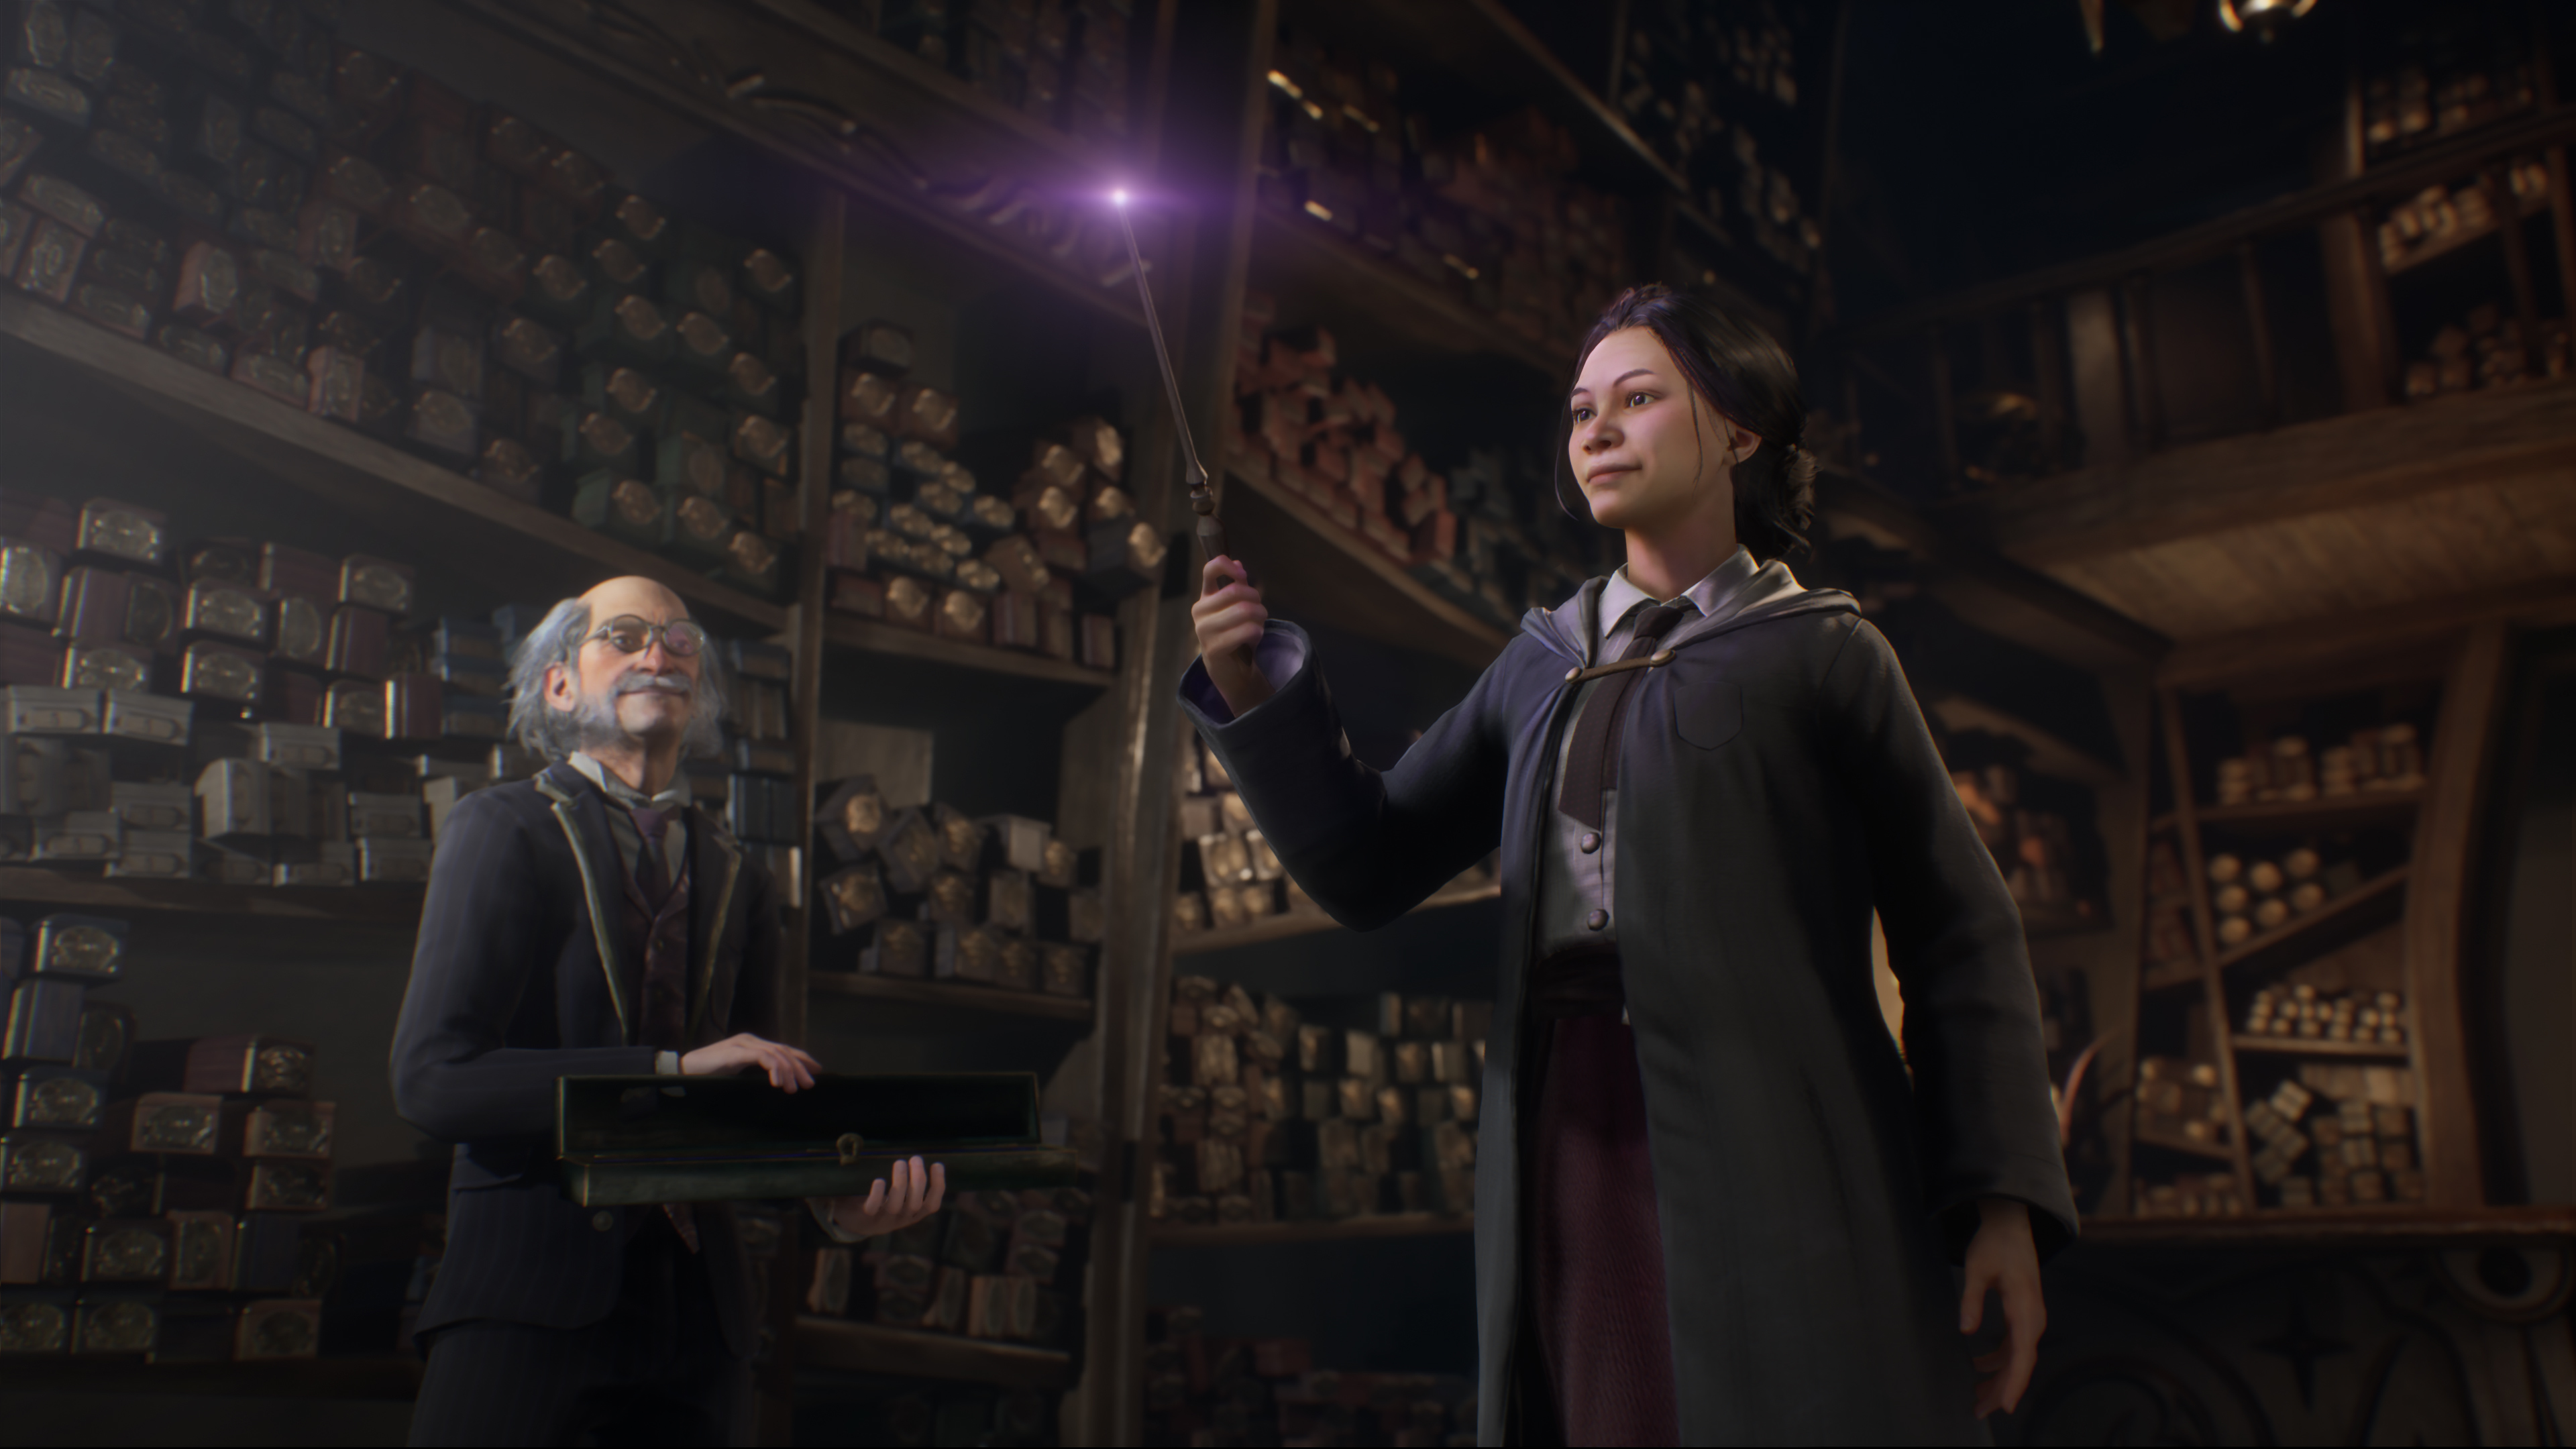 There is already a prototype to introduce multiplayer in Hogwarts Legacy